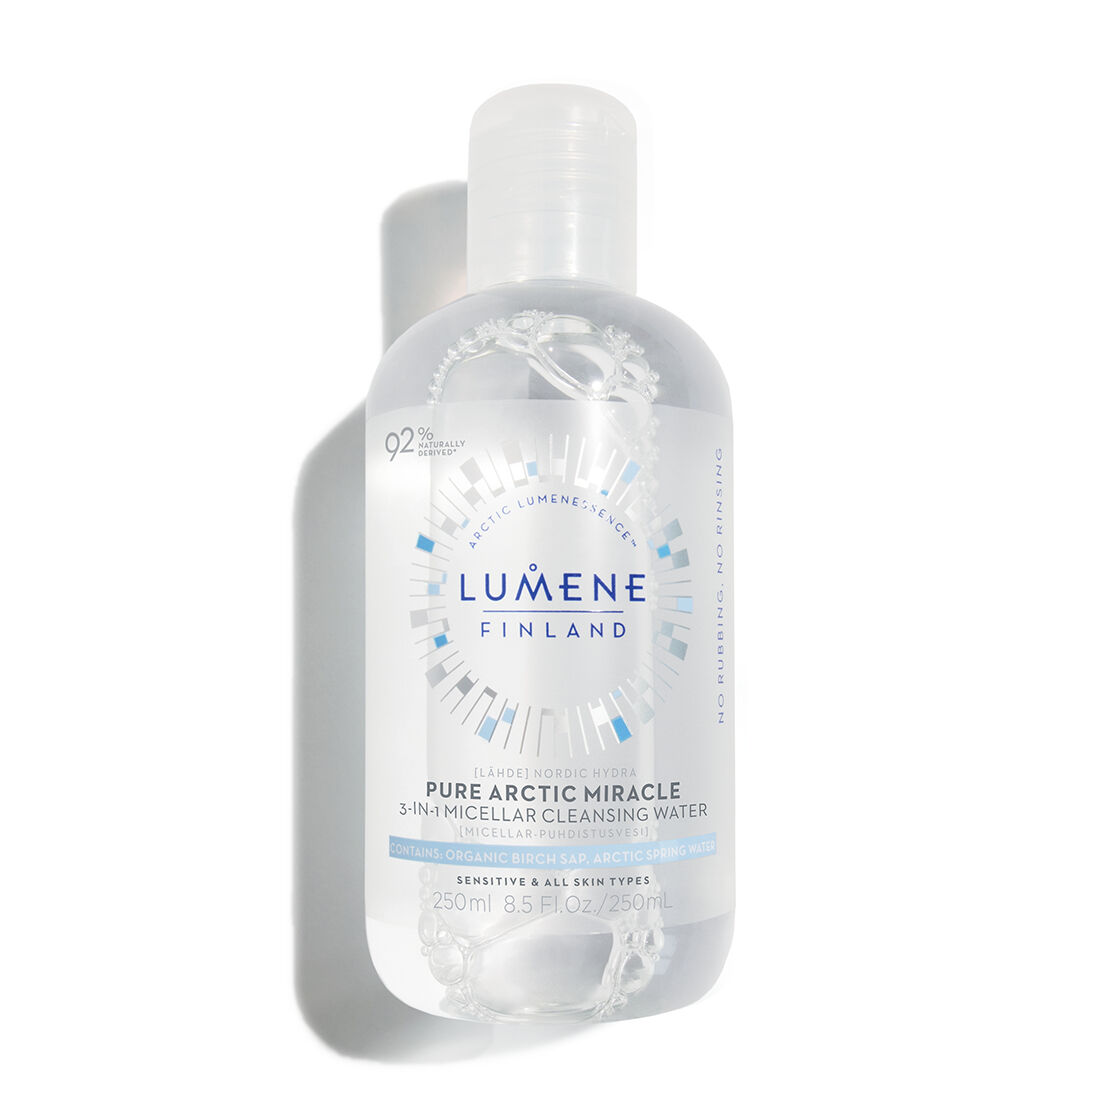 Lumene Lähde Pure Arctic Miracle 3-In-1 Micellar Cleansing Water 250ml